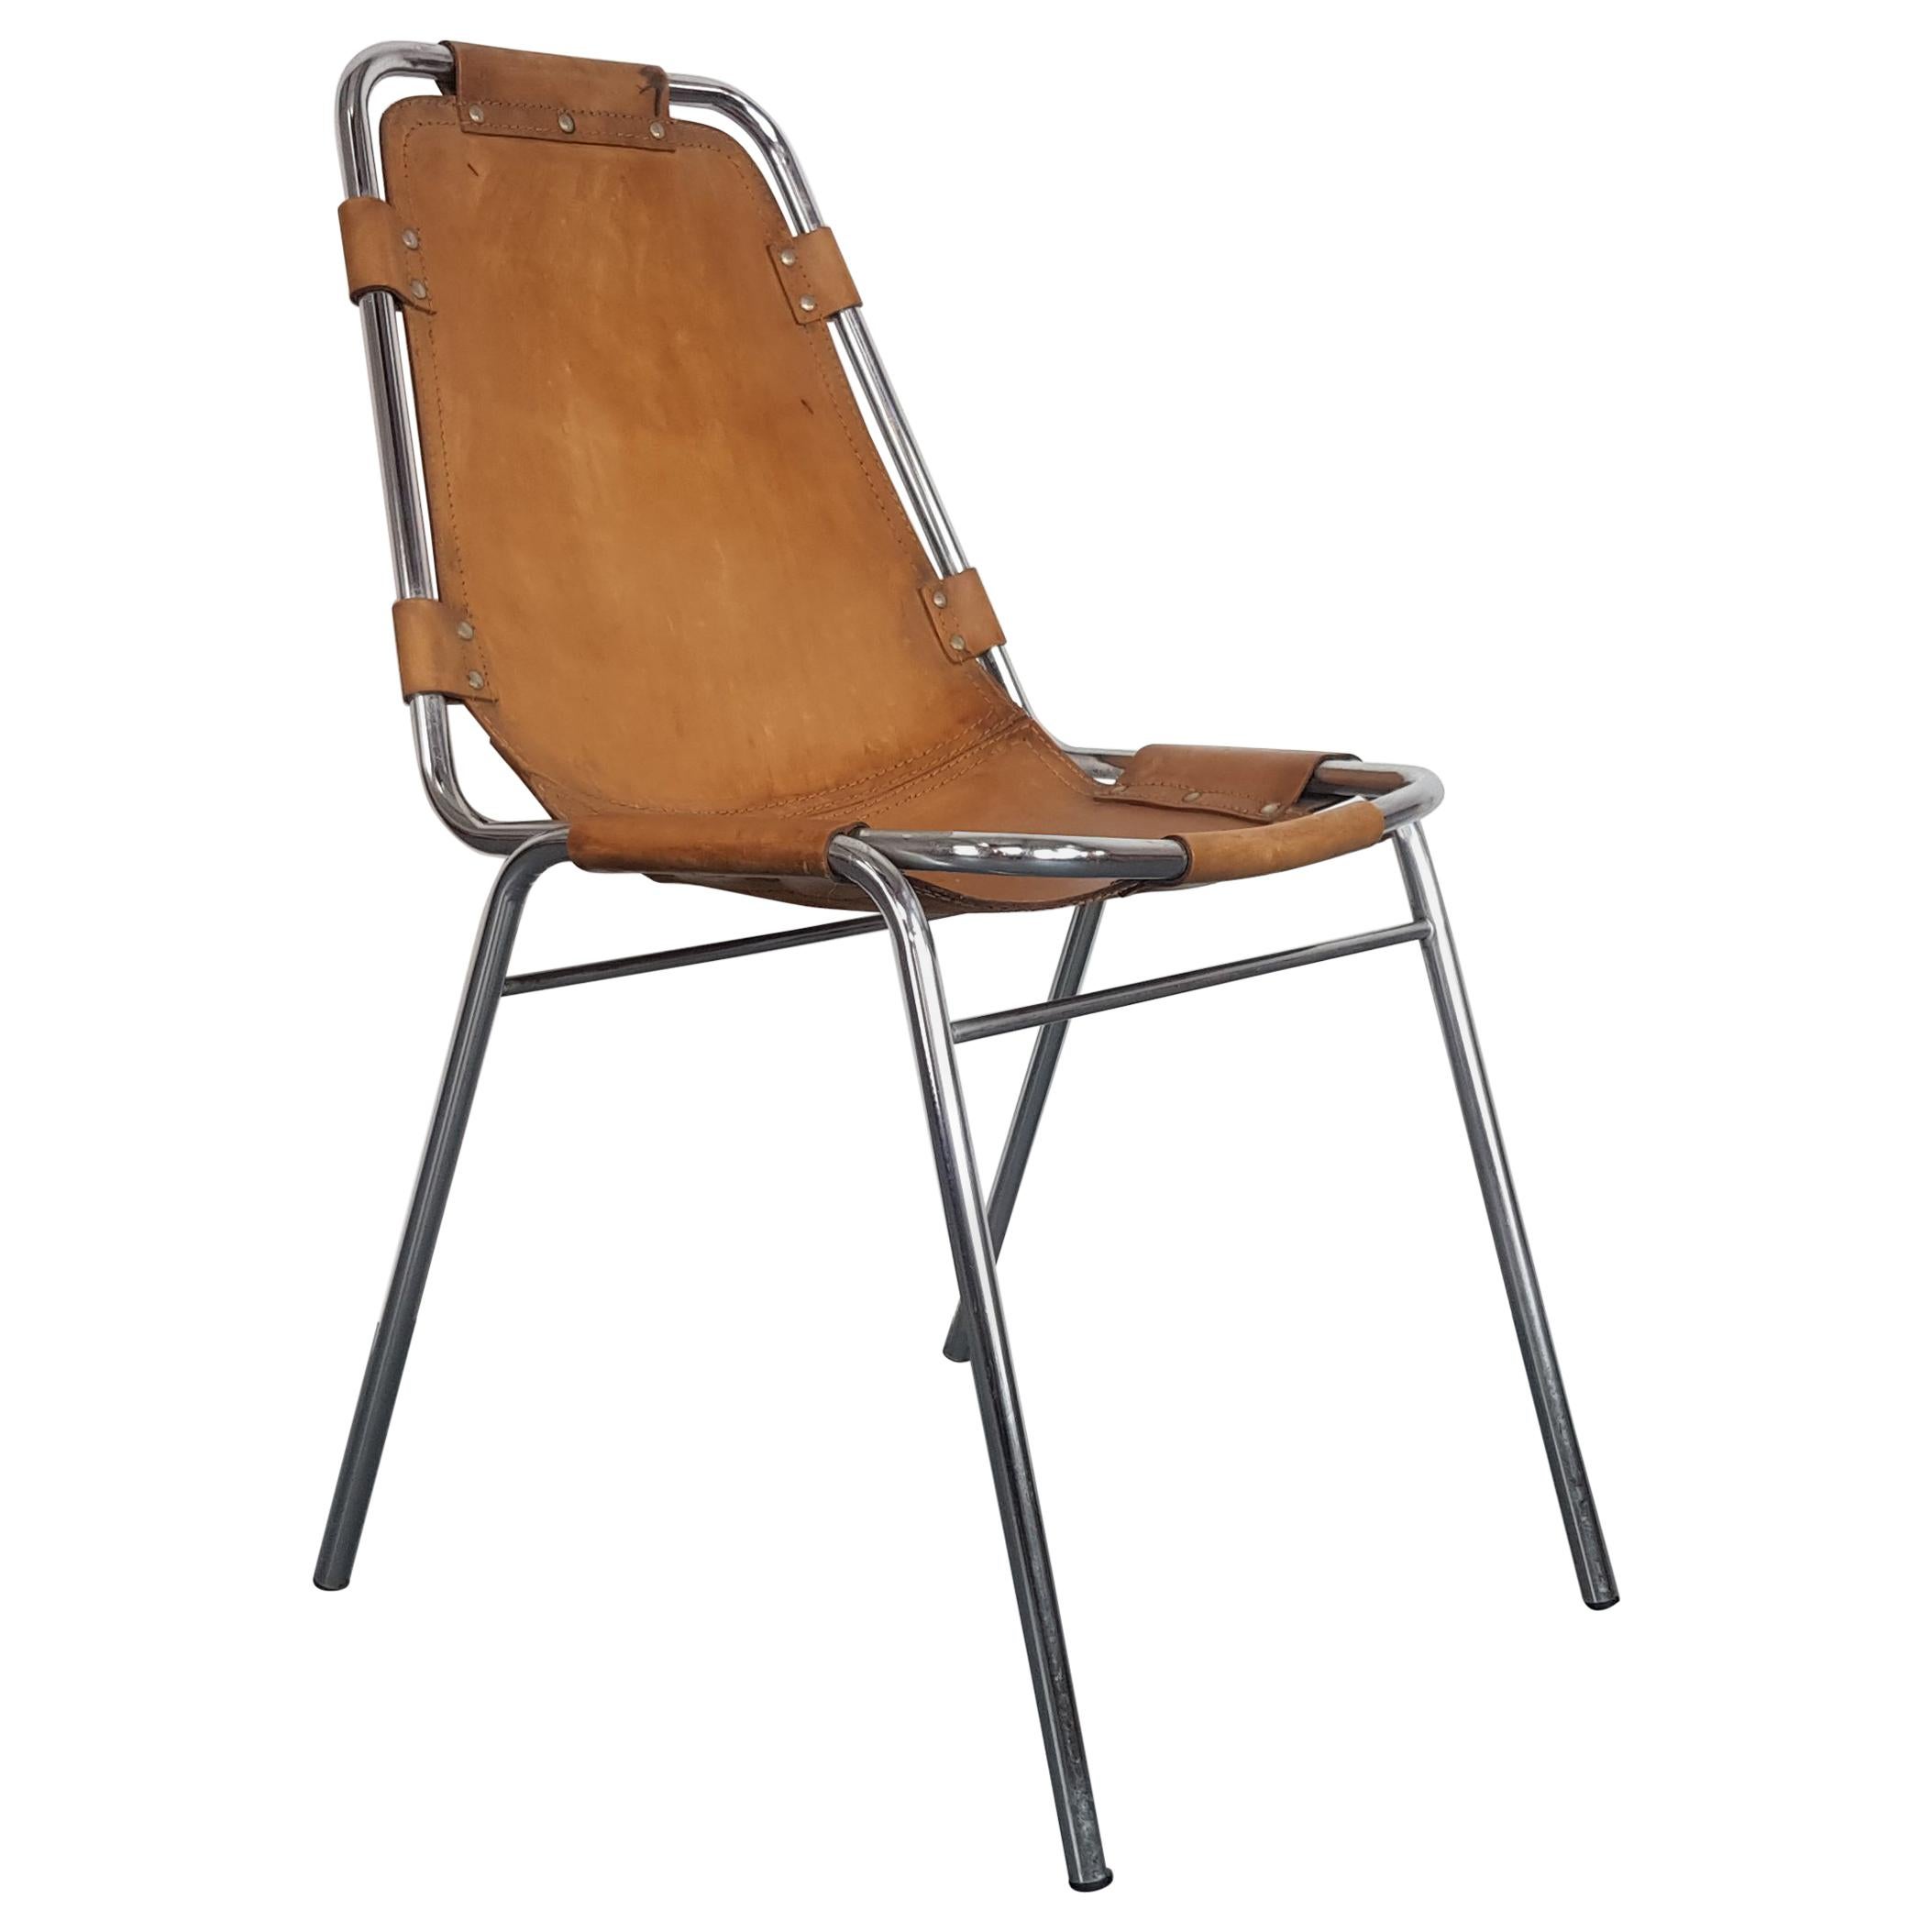 Midcentury 1970s "Les Arcs" Brown Leather and Chrome Chair